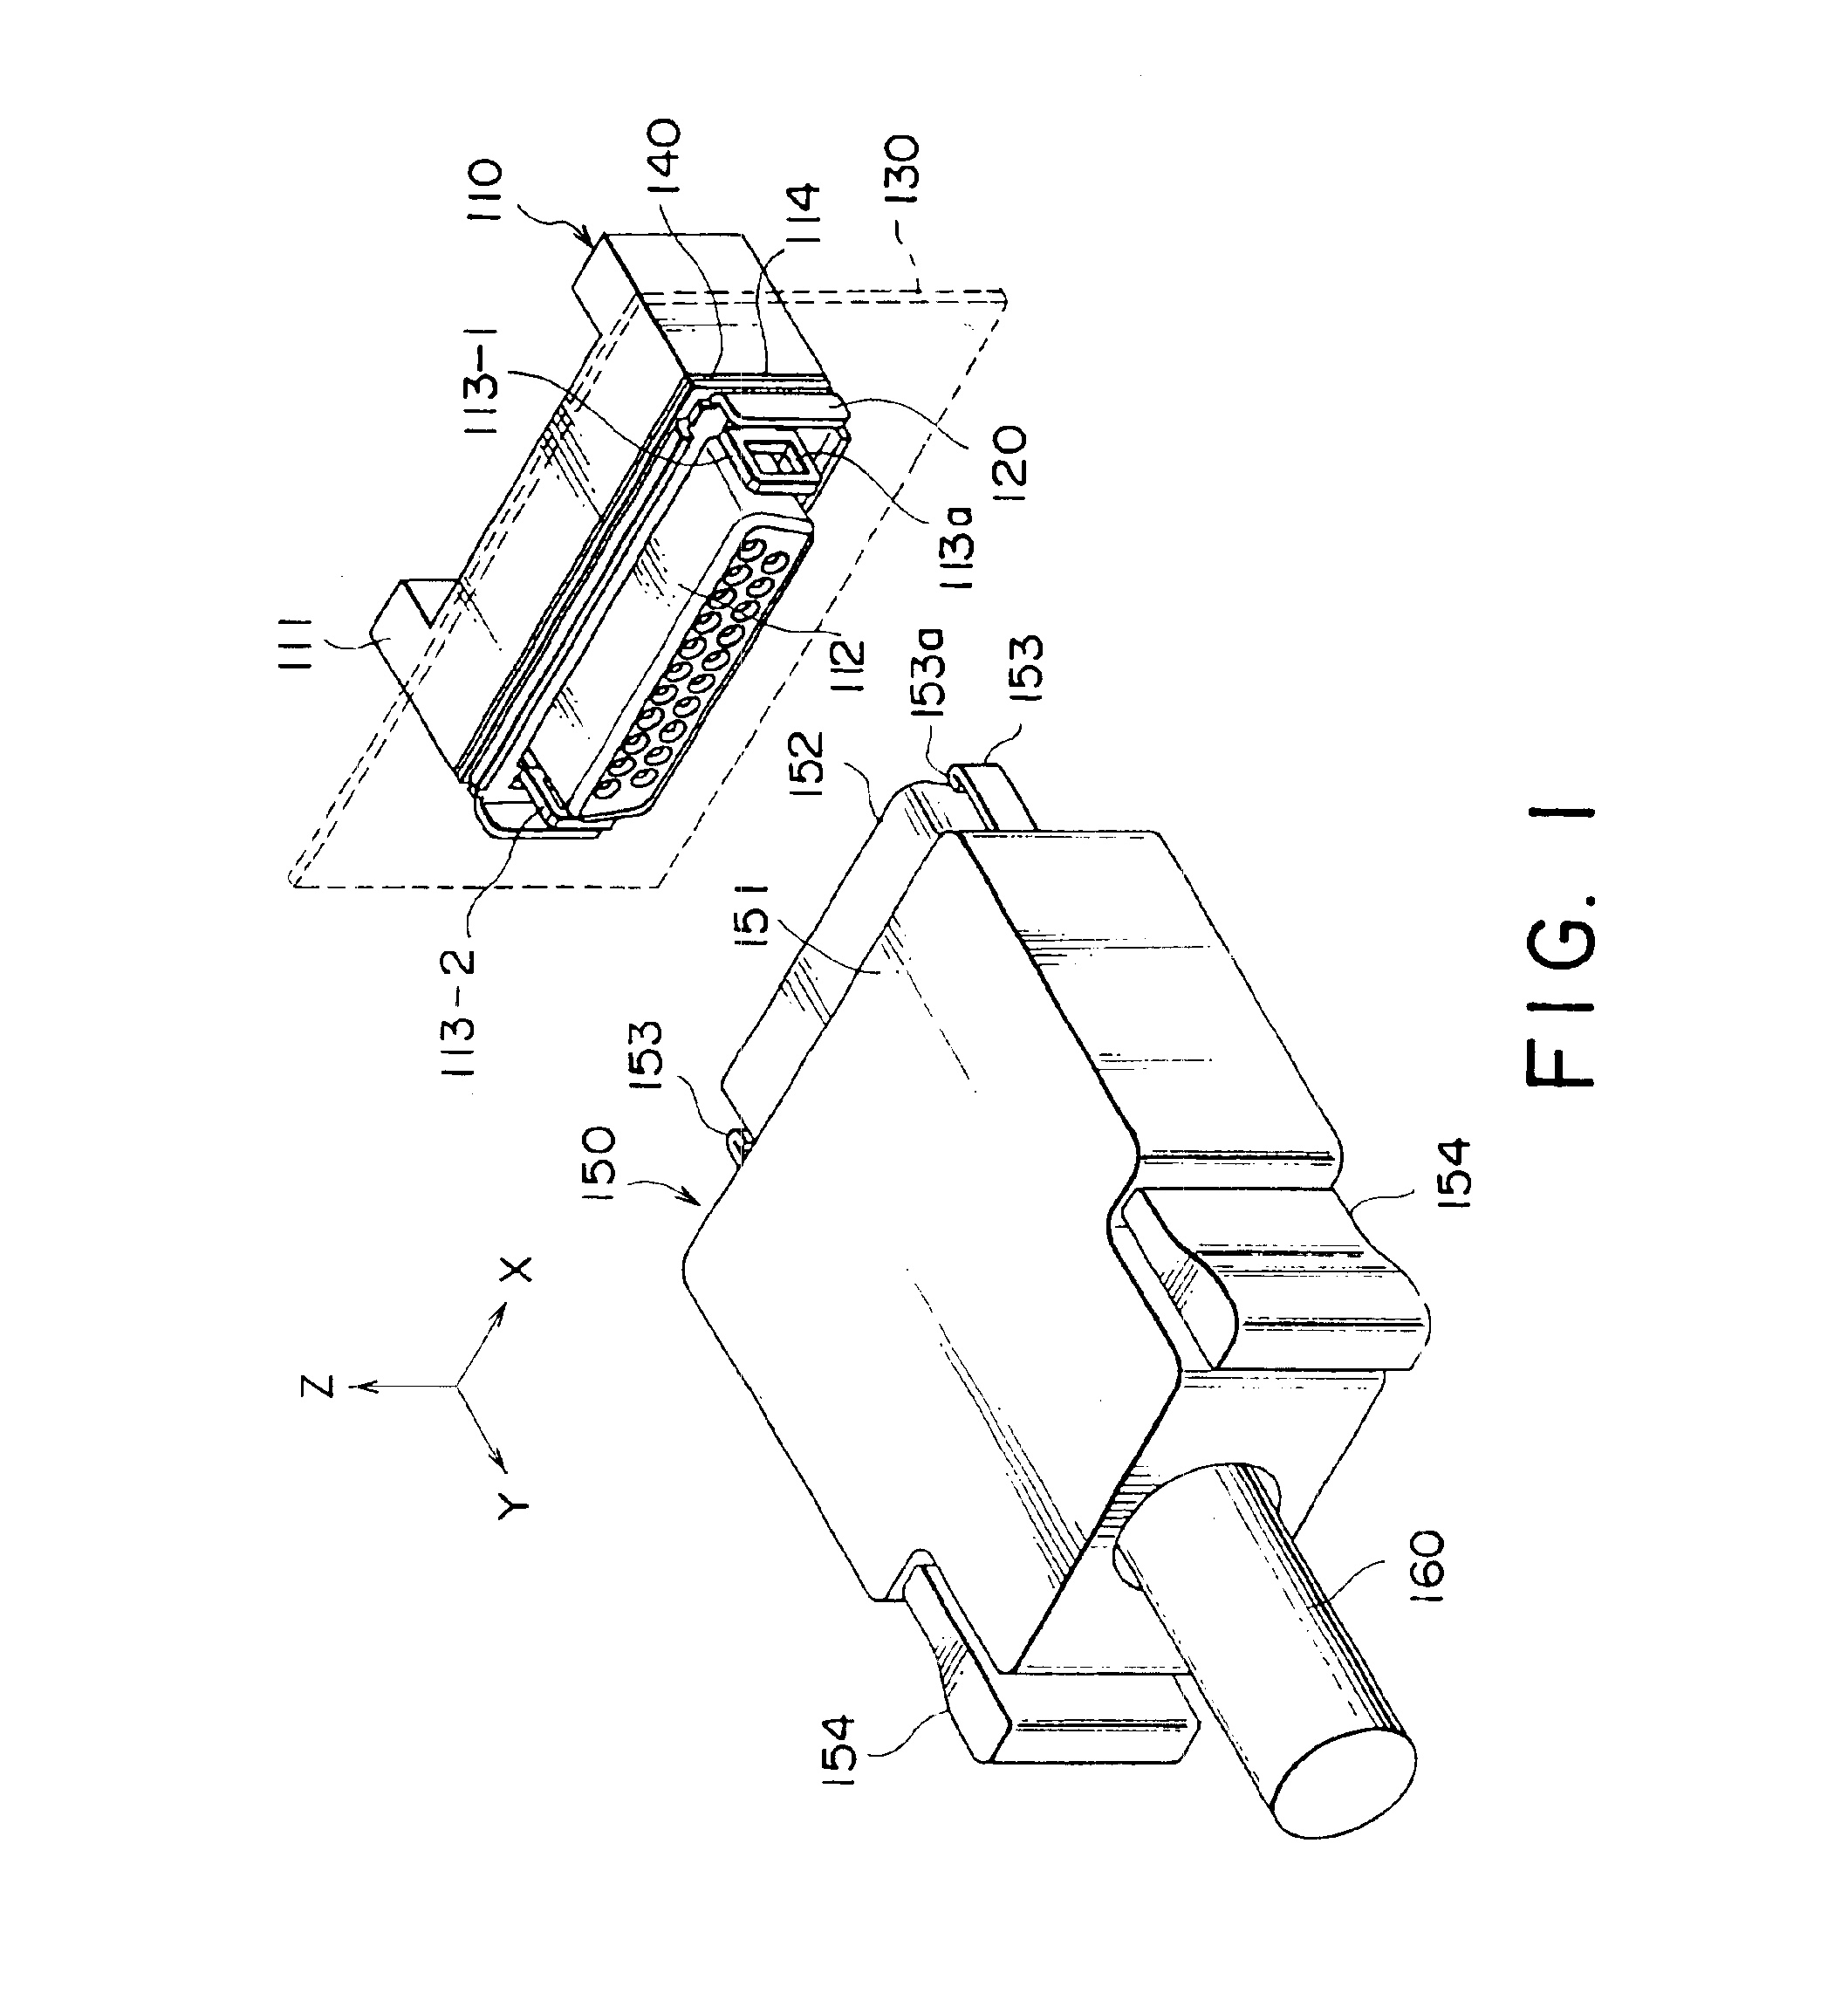 Combination of device and retainer clip for retaining the device through an open window in panel